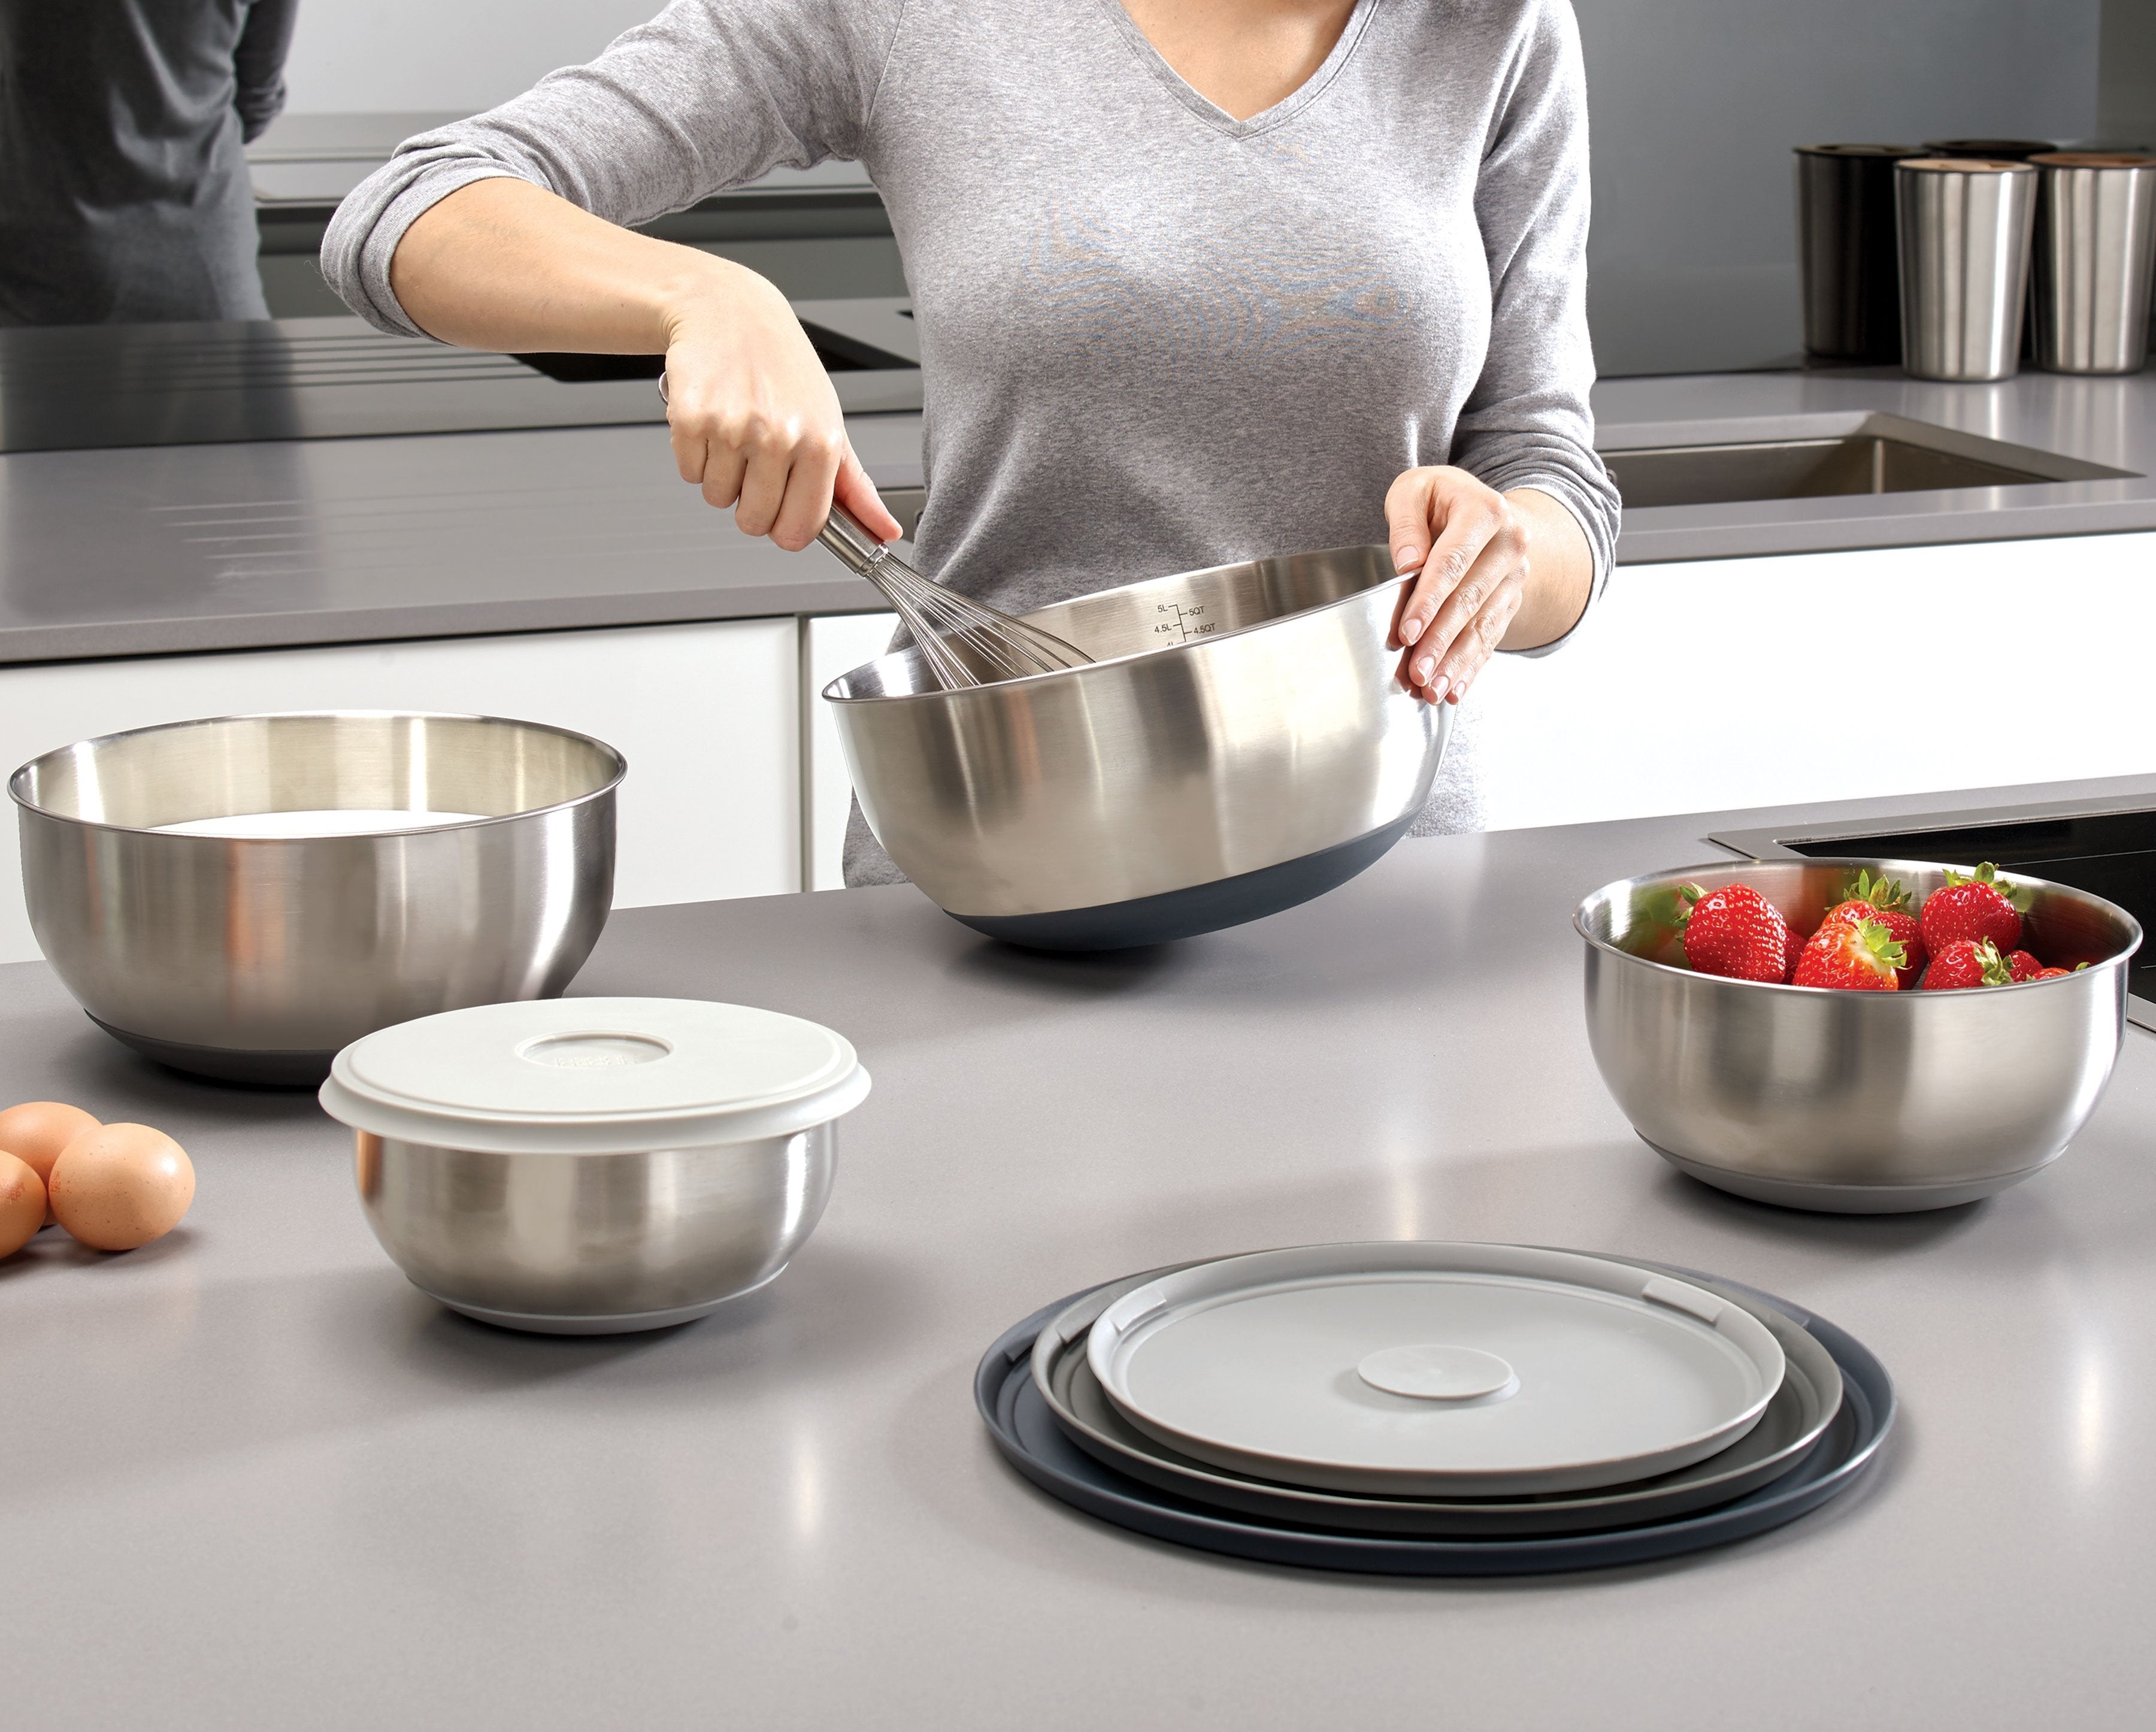 BEON.COM.AU  Each stainless-steel bowl in this 4-piece set has its own silicone lid so you can easily prepare food in advance and then store it until needed.  Made from high-quality 18/8 stainless-steel Stainless-steel means bowls won't stain or retain odours Bowls nest inside each other for space-saving... Joseph Joseph at BEON.COM.AU